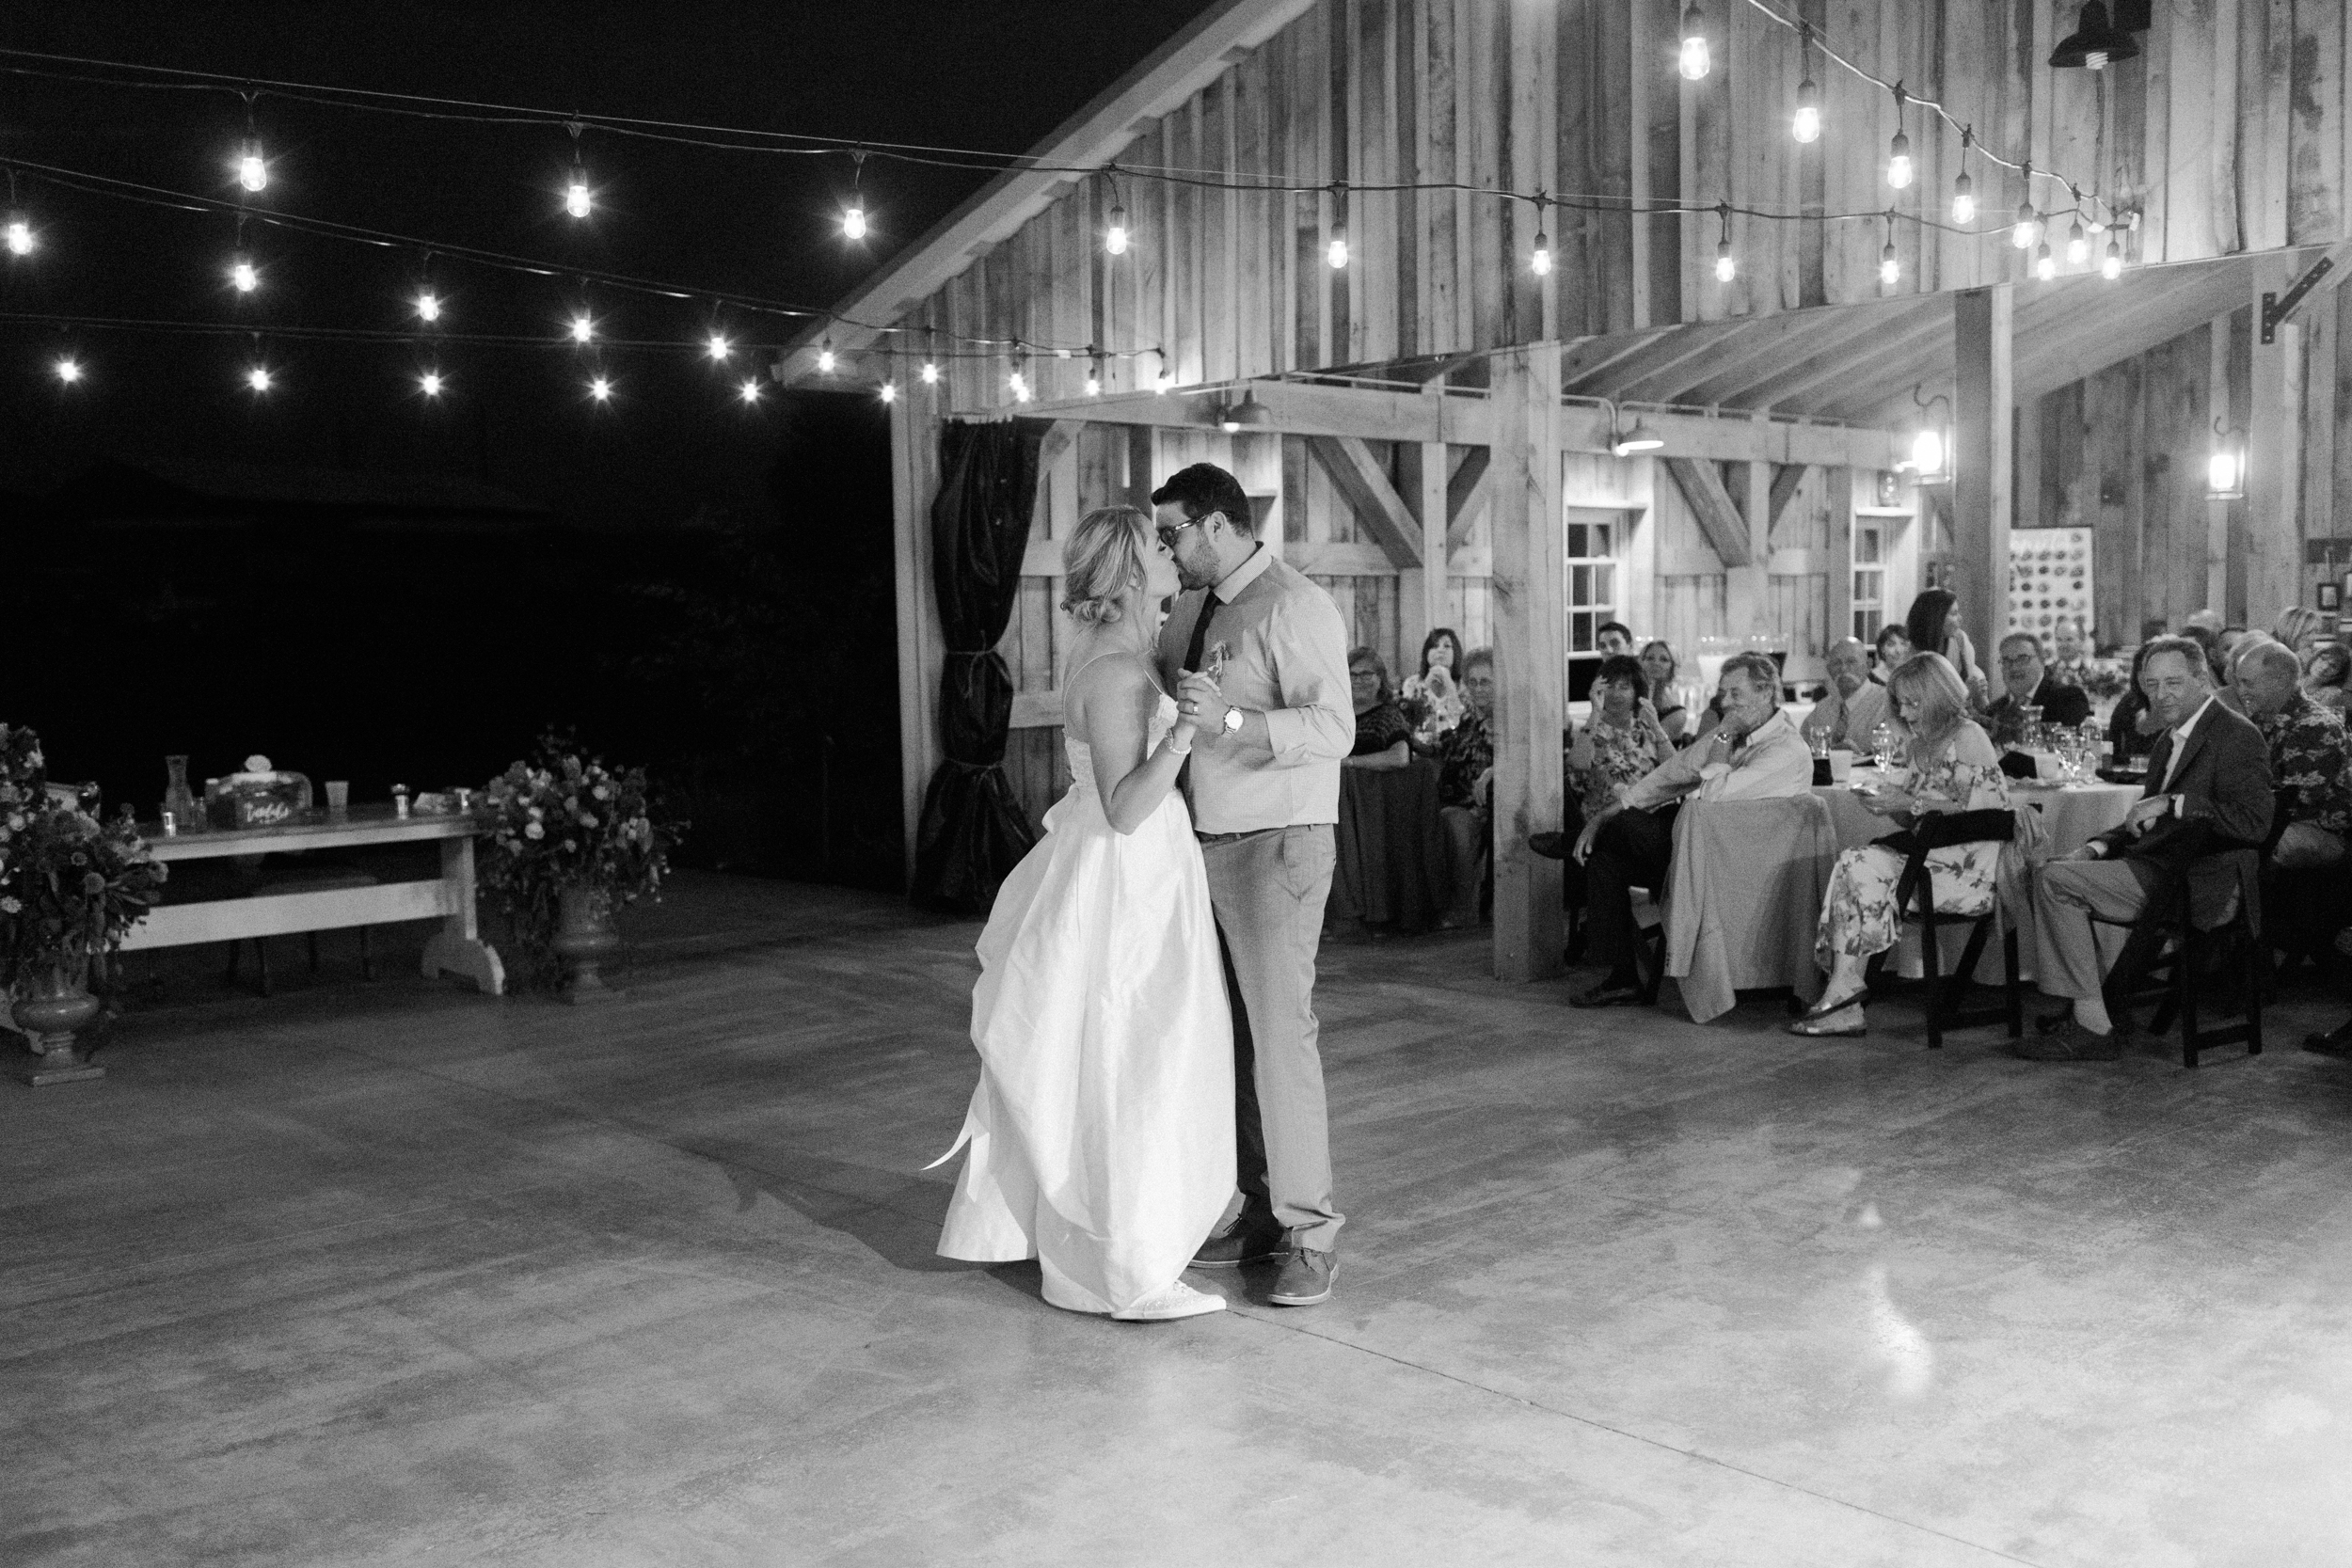 First dance under twinkly lights. Photographed by Morgan Williams Photography.